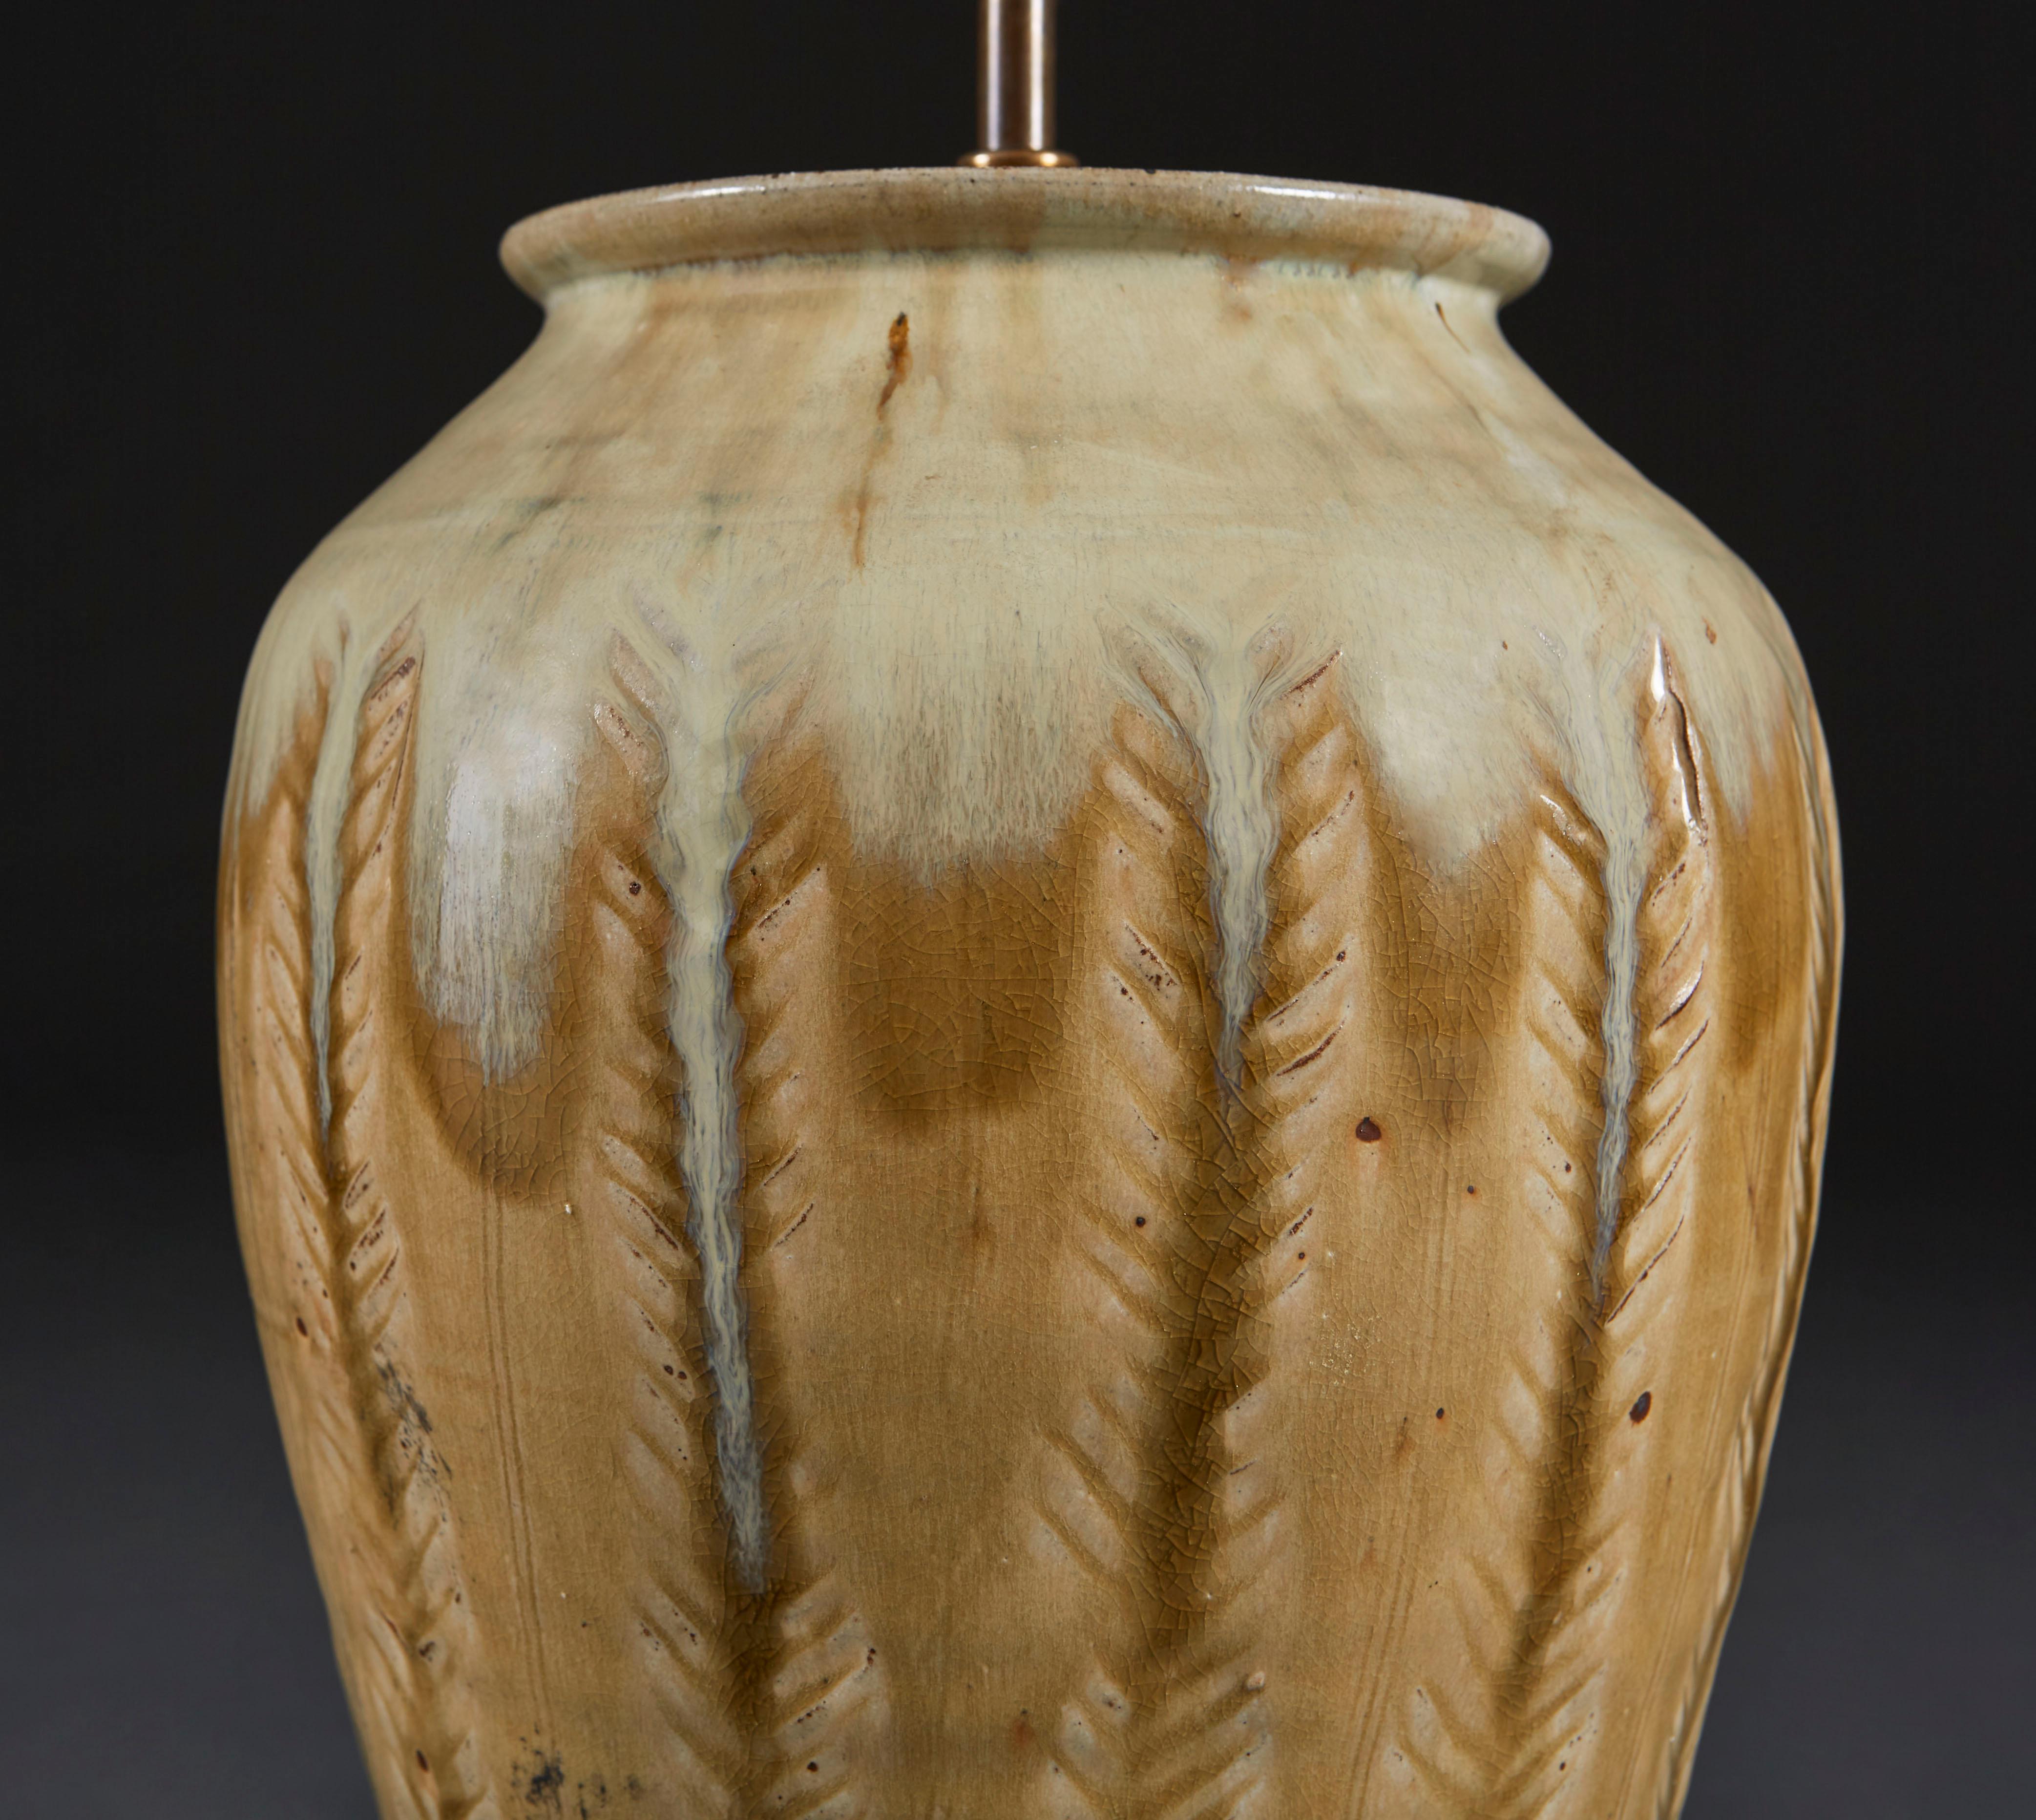 An over scale art pottery vase, the stoneware impressed with feathers and finished with a subtle pale blue drip glaze to the upper portion. By Mike Dodd (b.1943).

Please note: lampshade not included.

Currently wired for the UK.